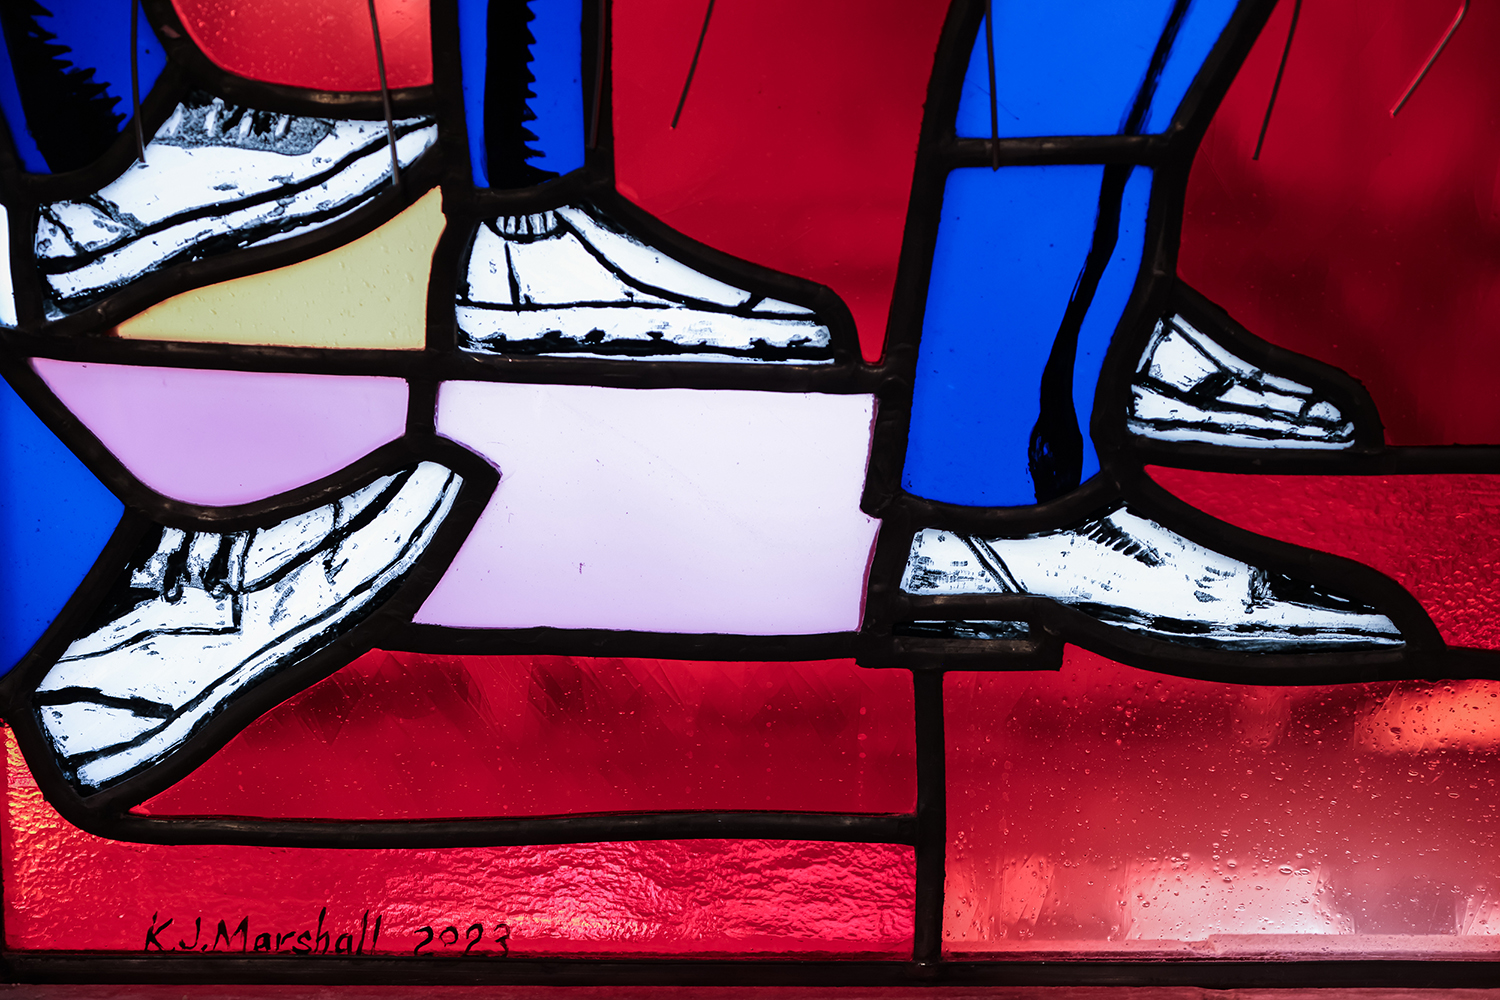 Kerry James Marshall signed and dated the new window's which can be spotted below the shoes in one of the four complete panel's he designed and created (?). Photo courtesy of Washington National Cathedral